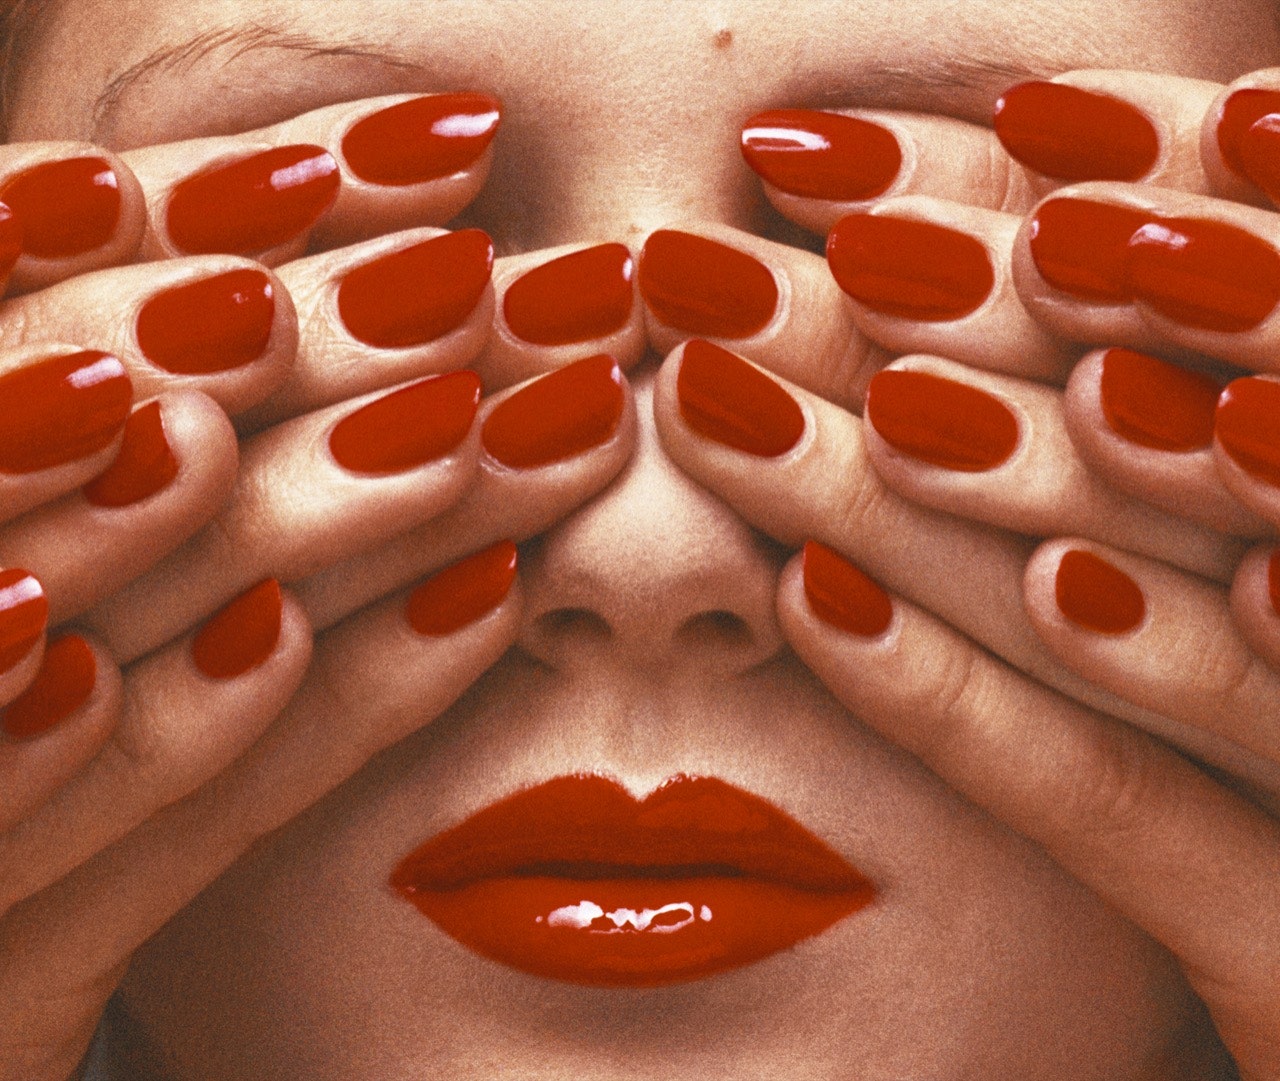 The Guy Bourdin Estate 2020 Courtesy of Louise Alexander Gallery